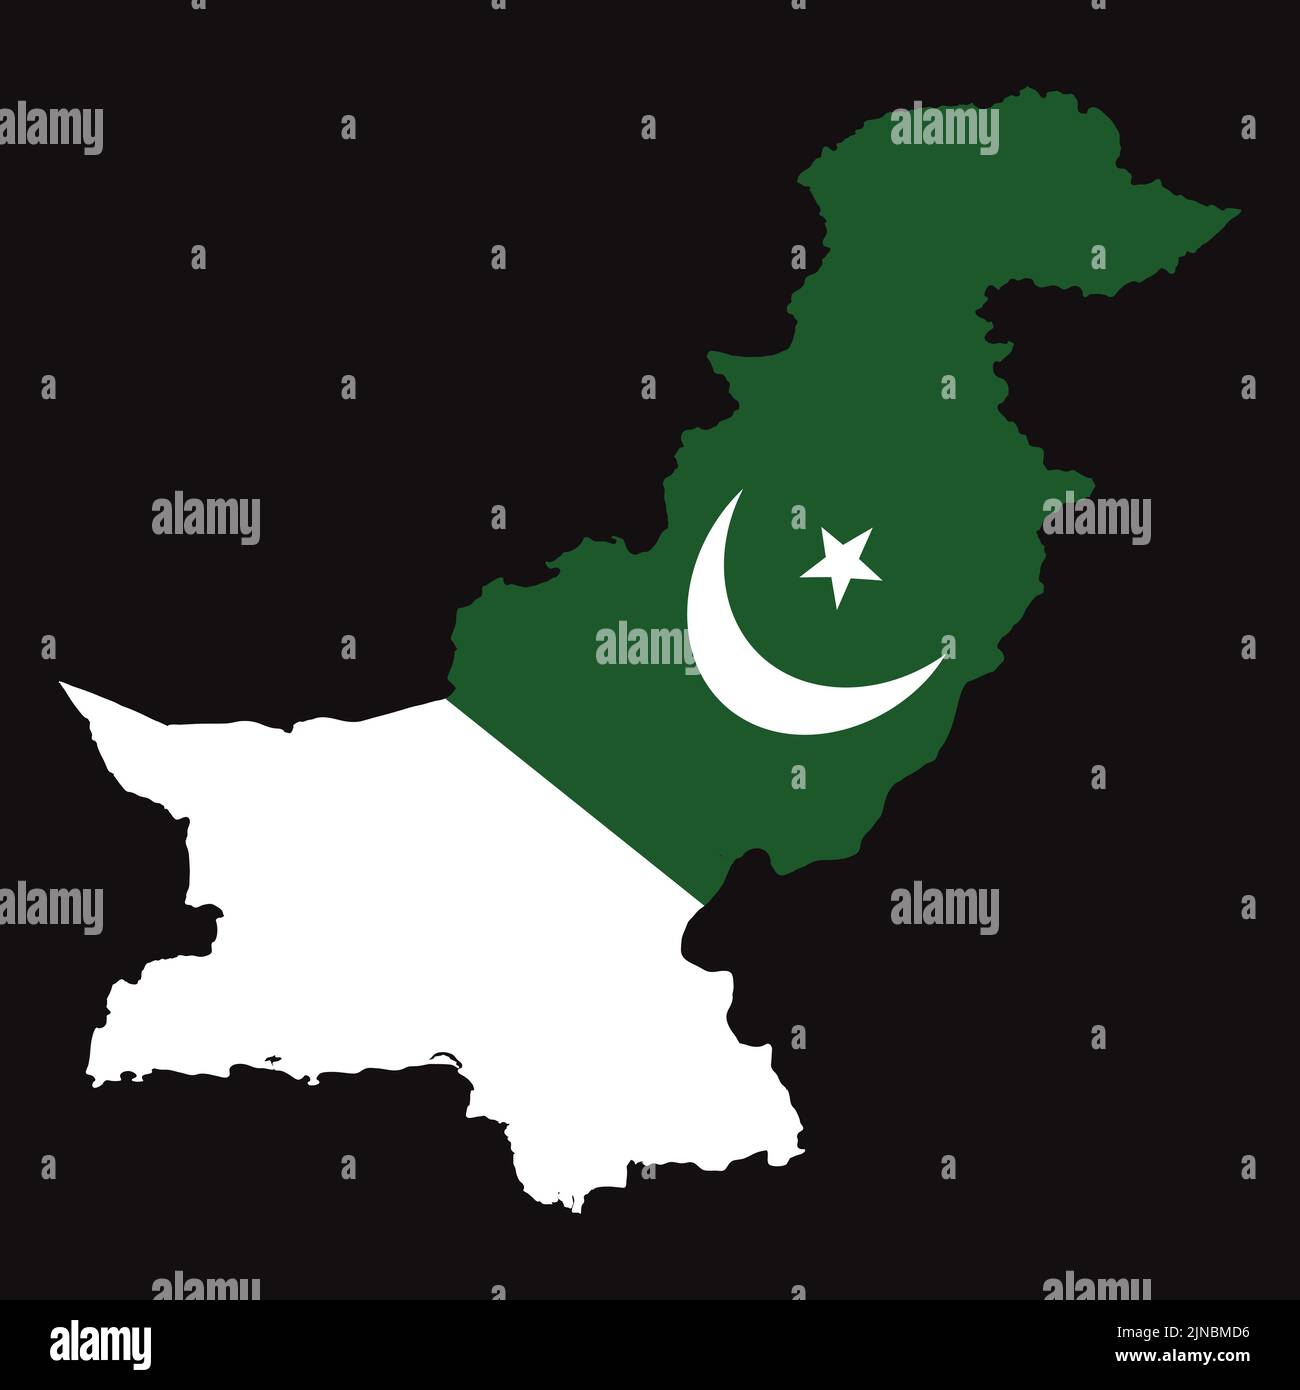 Vector design illustration of the Pakistan map with the crescent and star on it with colors of green and white. all isolated on a black square backgro Stock Vector